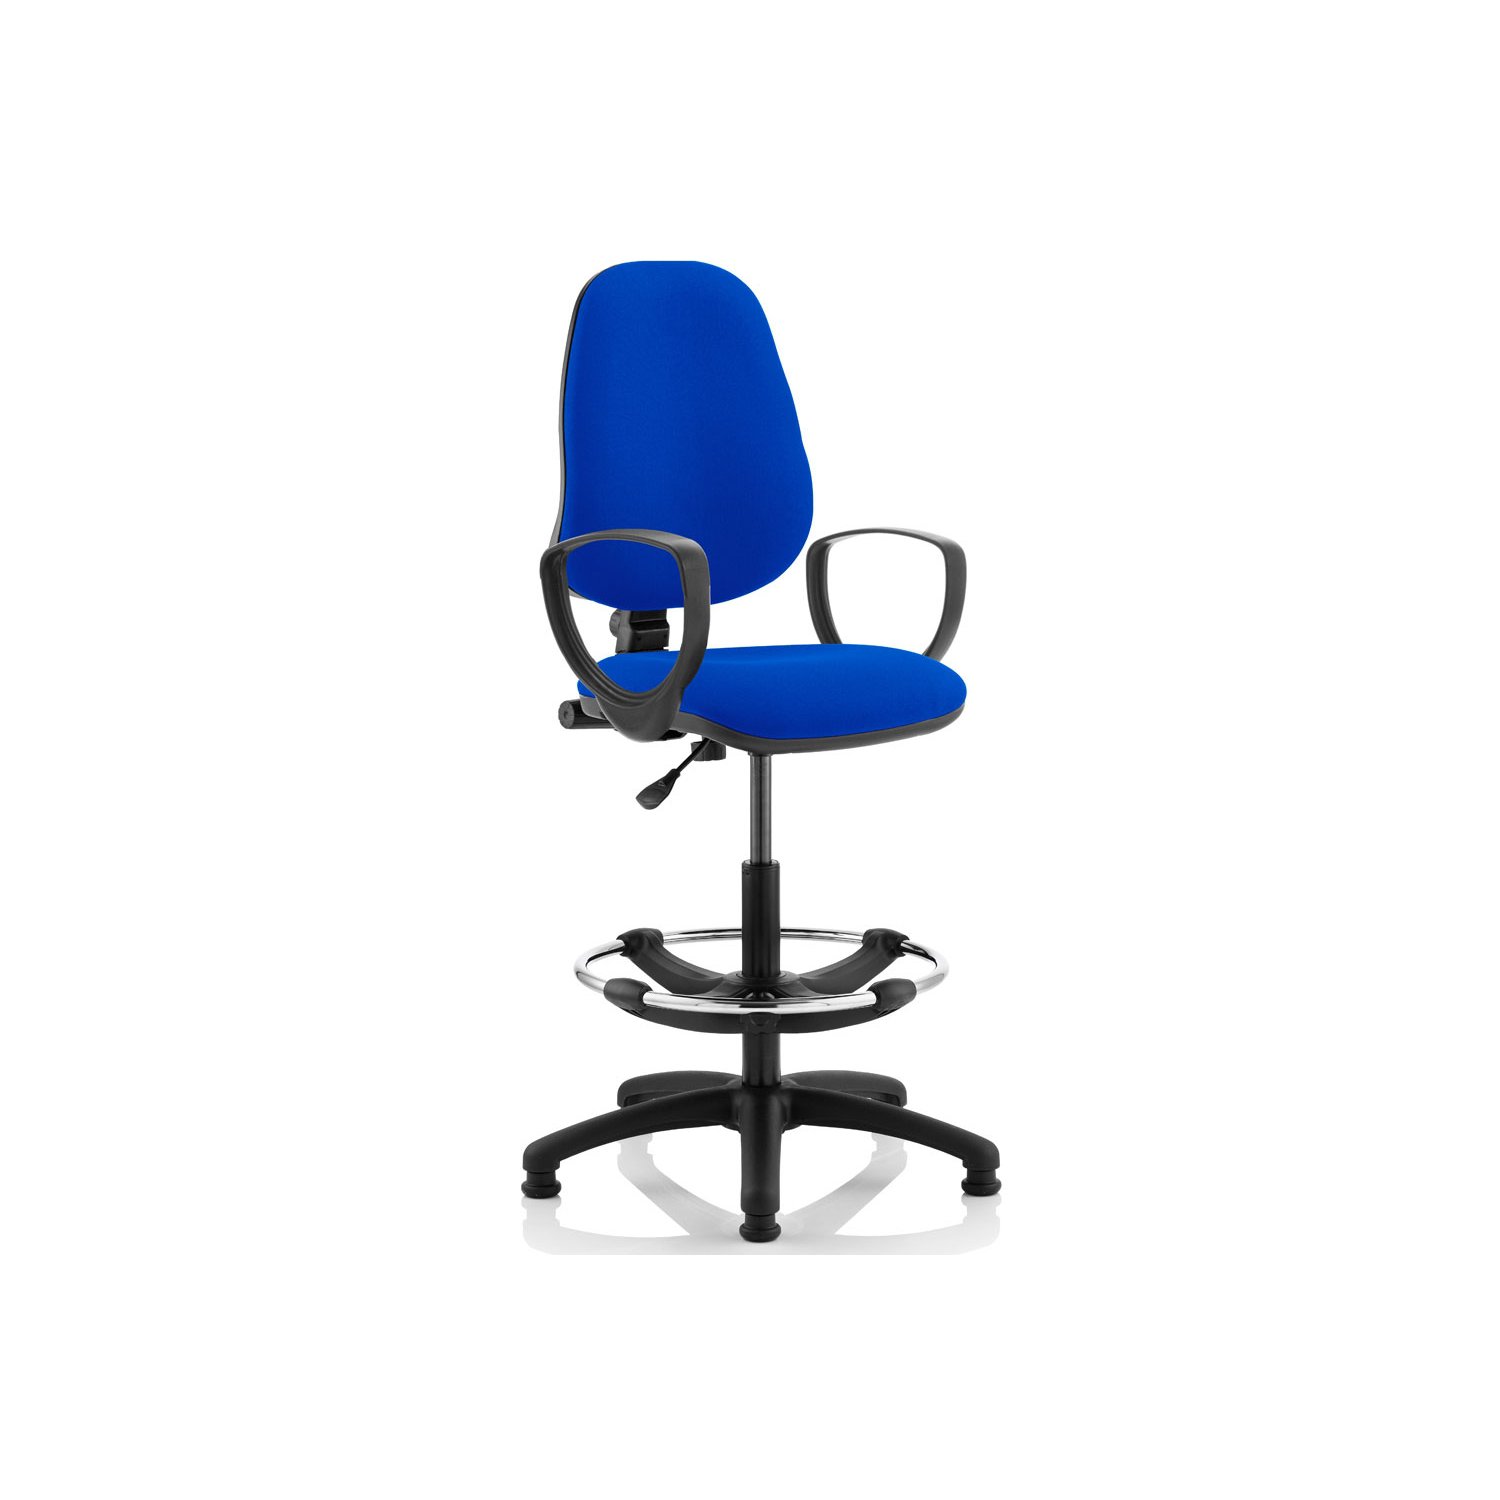 Lunar 1 Lever Draughtsman Chair (Fixed Arms), Blue